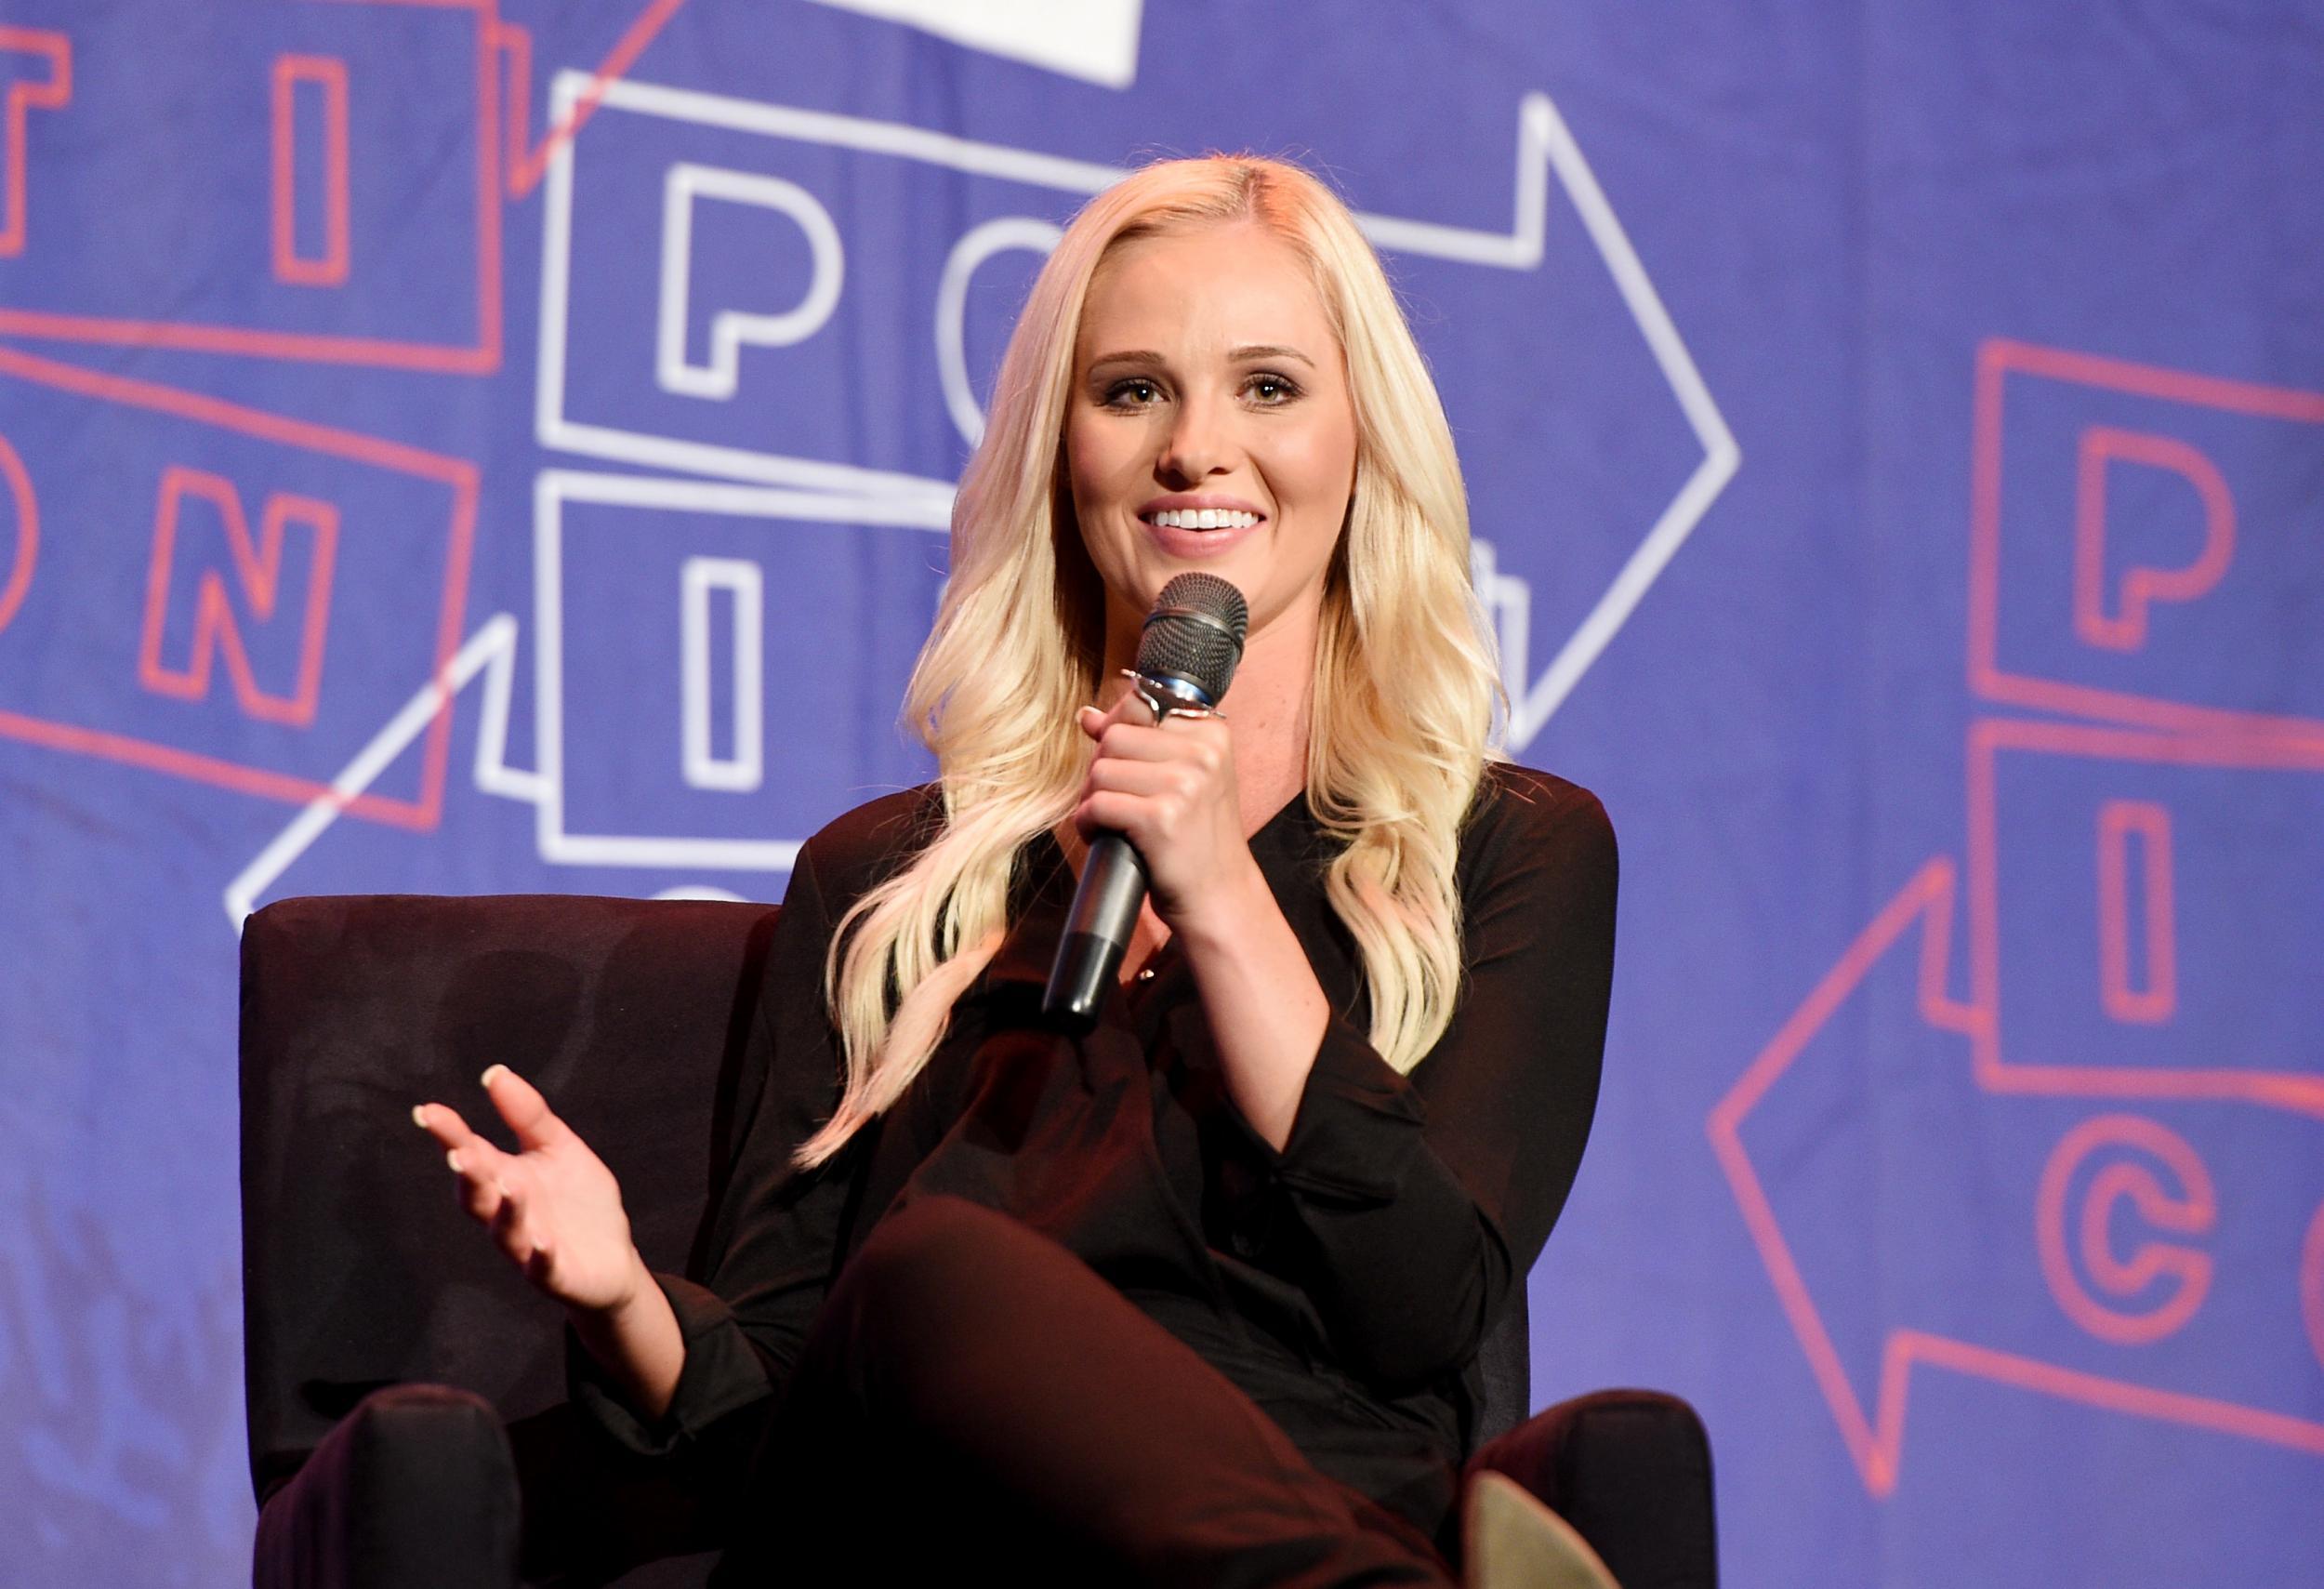 Tomi Lahren at 'Chelsea Handler in Conversation with Tomi Lahren' panel during Politicon